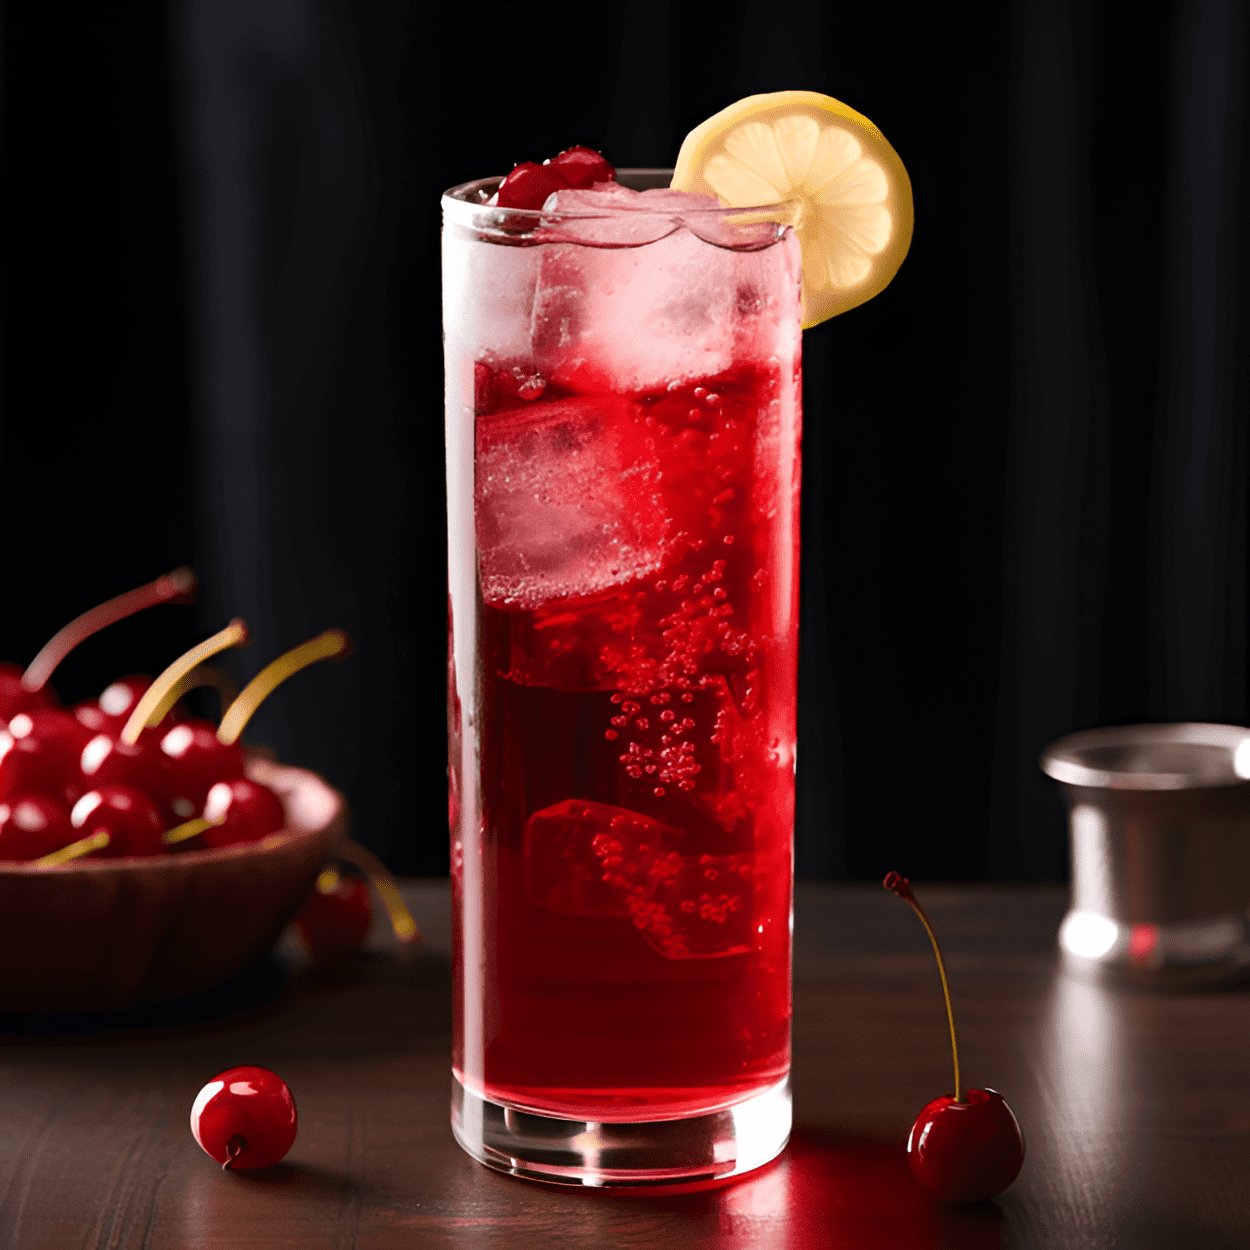 Swift Sunrise Cocktail Recipe - The Swift Sunrise is a delightful blend of sweet and sour, with a hint of sparkle. The sweetness of the grenadine is perfectly balanced by the tartness of the lemon juice, while the vodka gives it a strong, smooth finish. The champagne adds a touch of sophistication and sparkle, making it a truly refreshing cocktail.